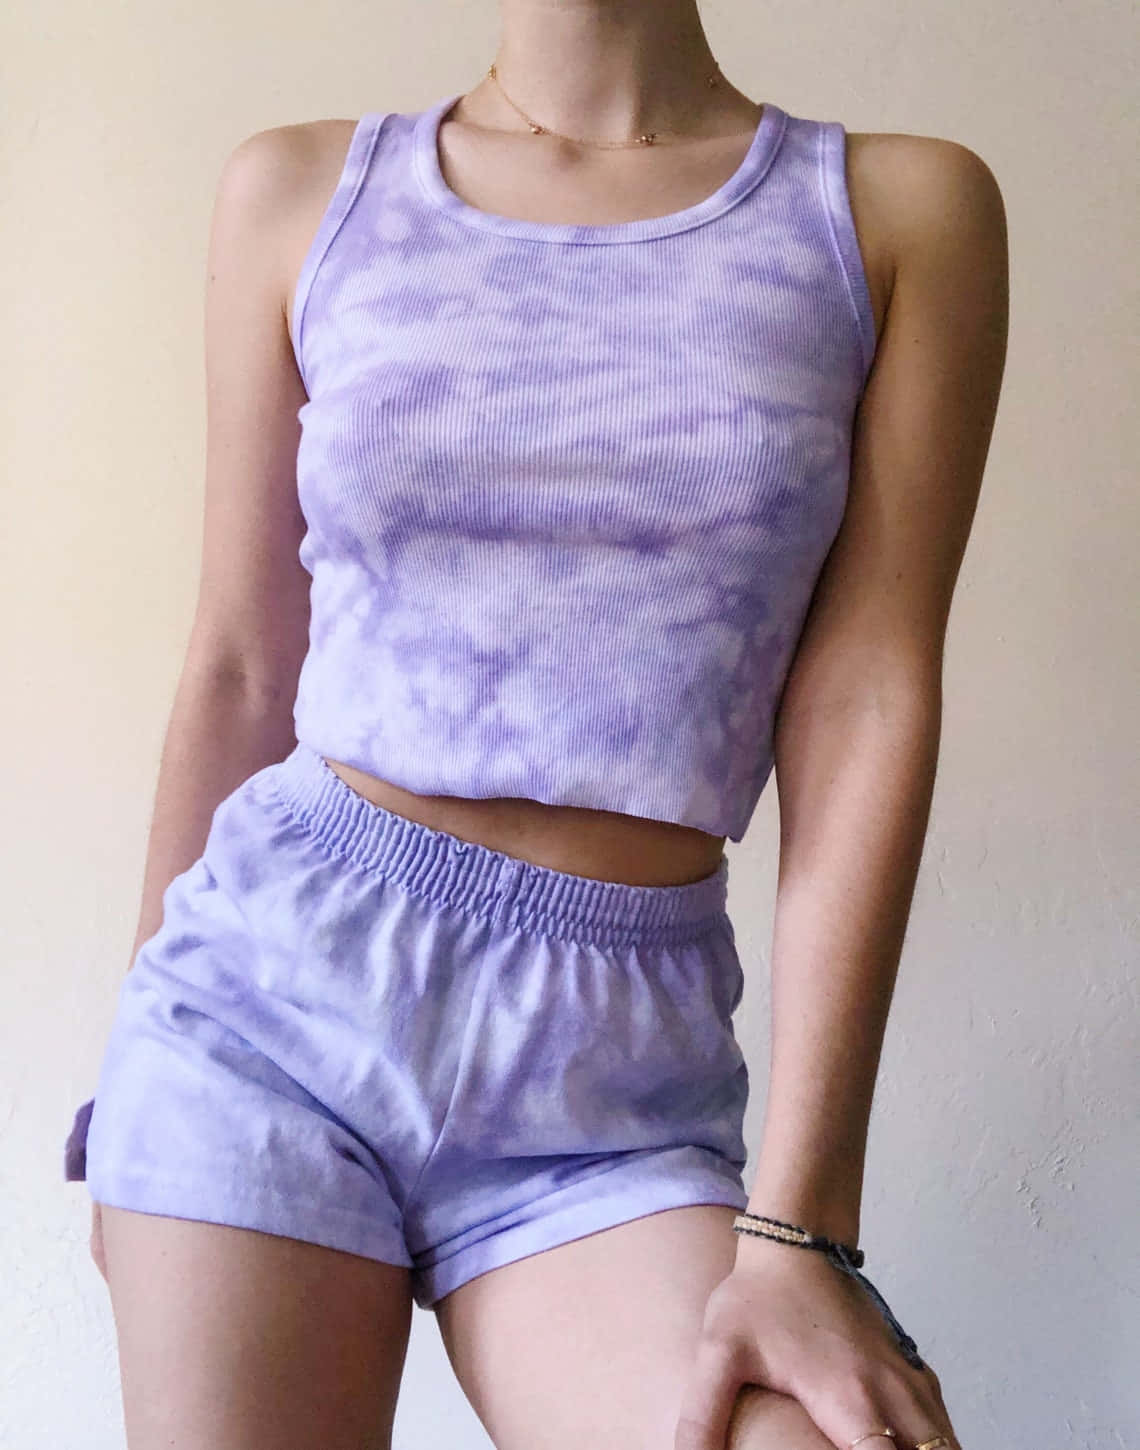 Stylish Purple Shorts For Your Summer Outfit Wallpaper